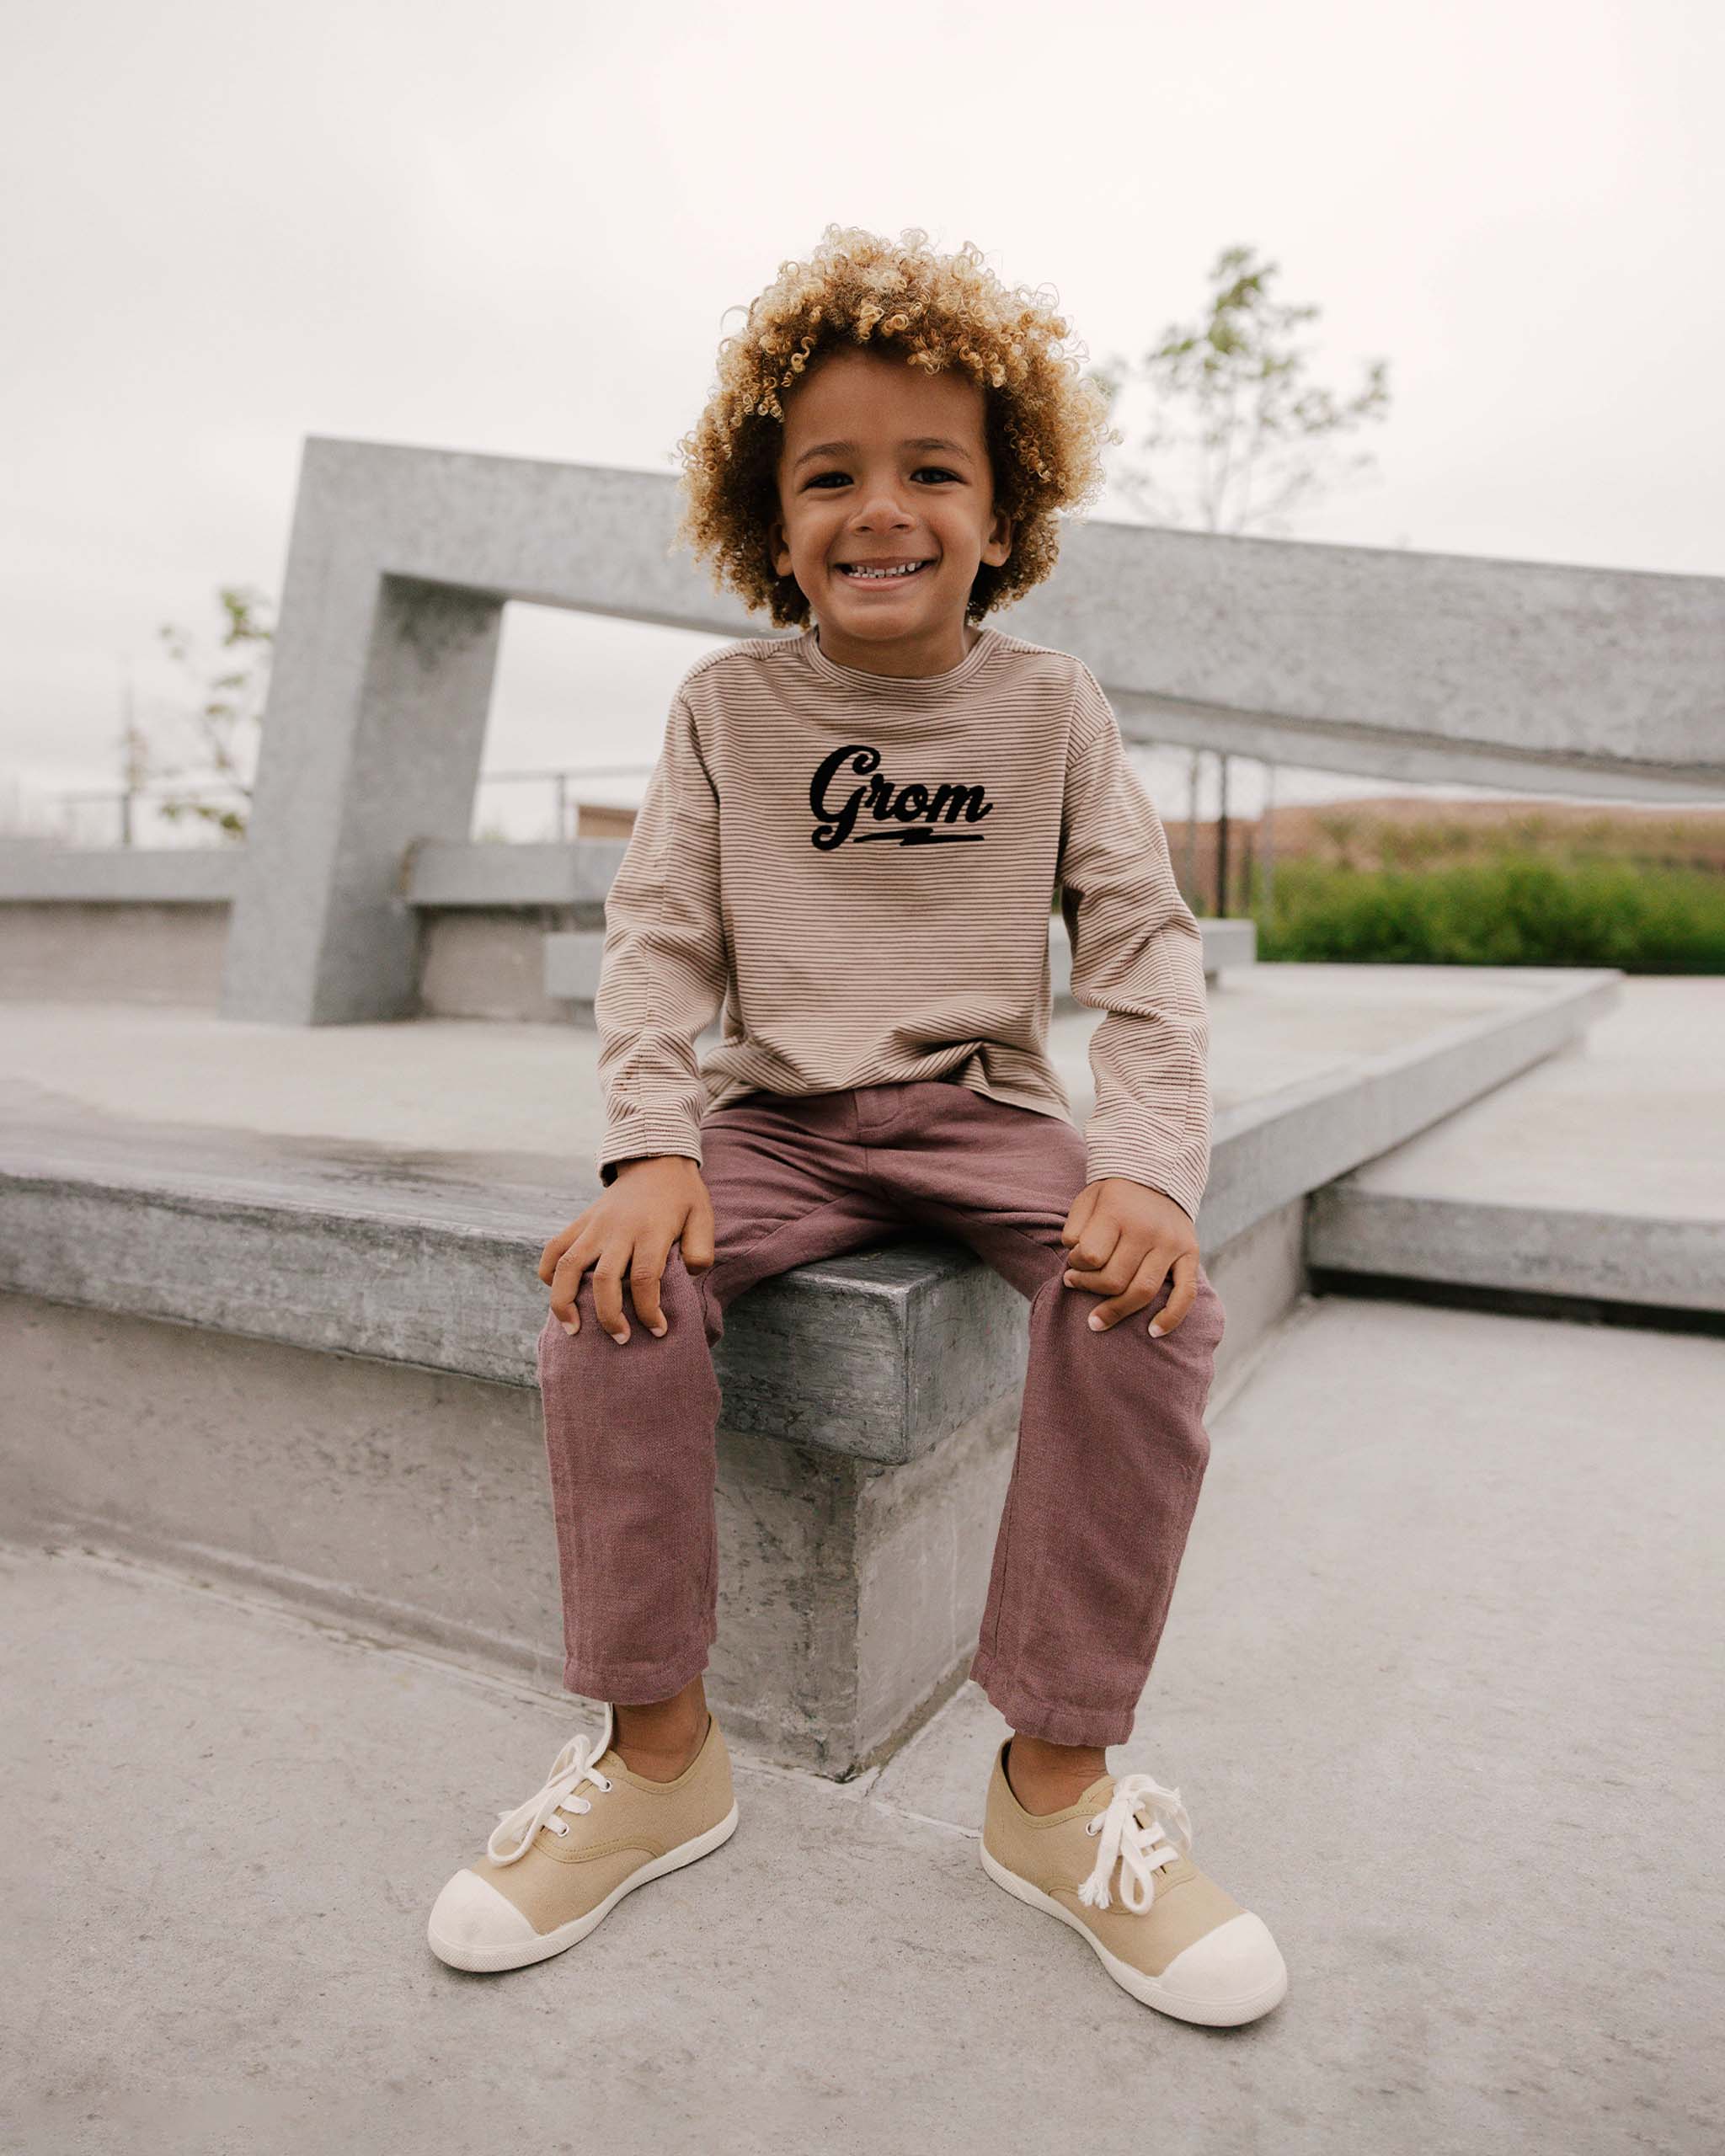 Long Sleeve Paneled Tee || Grom - Rylee + Cru | Kids Clothes | Trendy Baby Clothes | Modern Infant Outfits |